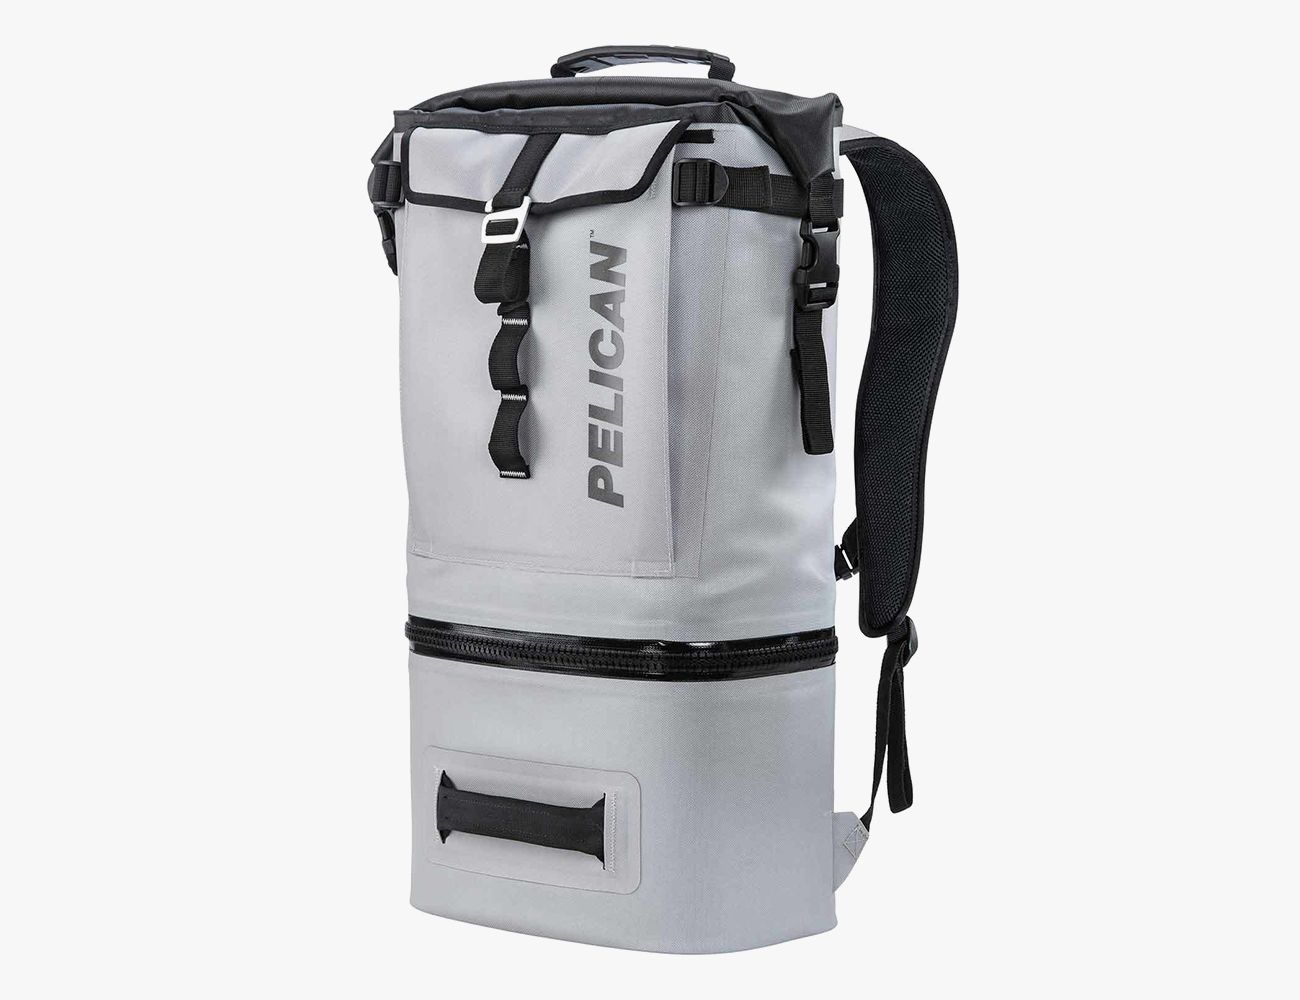 RTIC Backpack Cooler vs. YETI Hopper M20: Which Backpack Cooler Is Better?